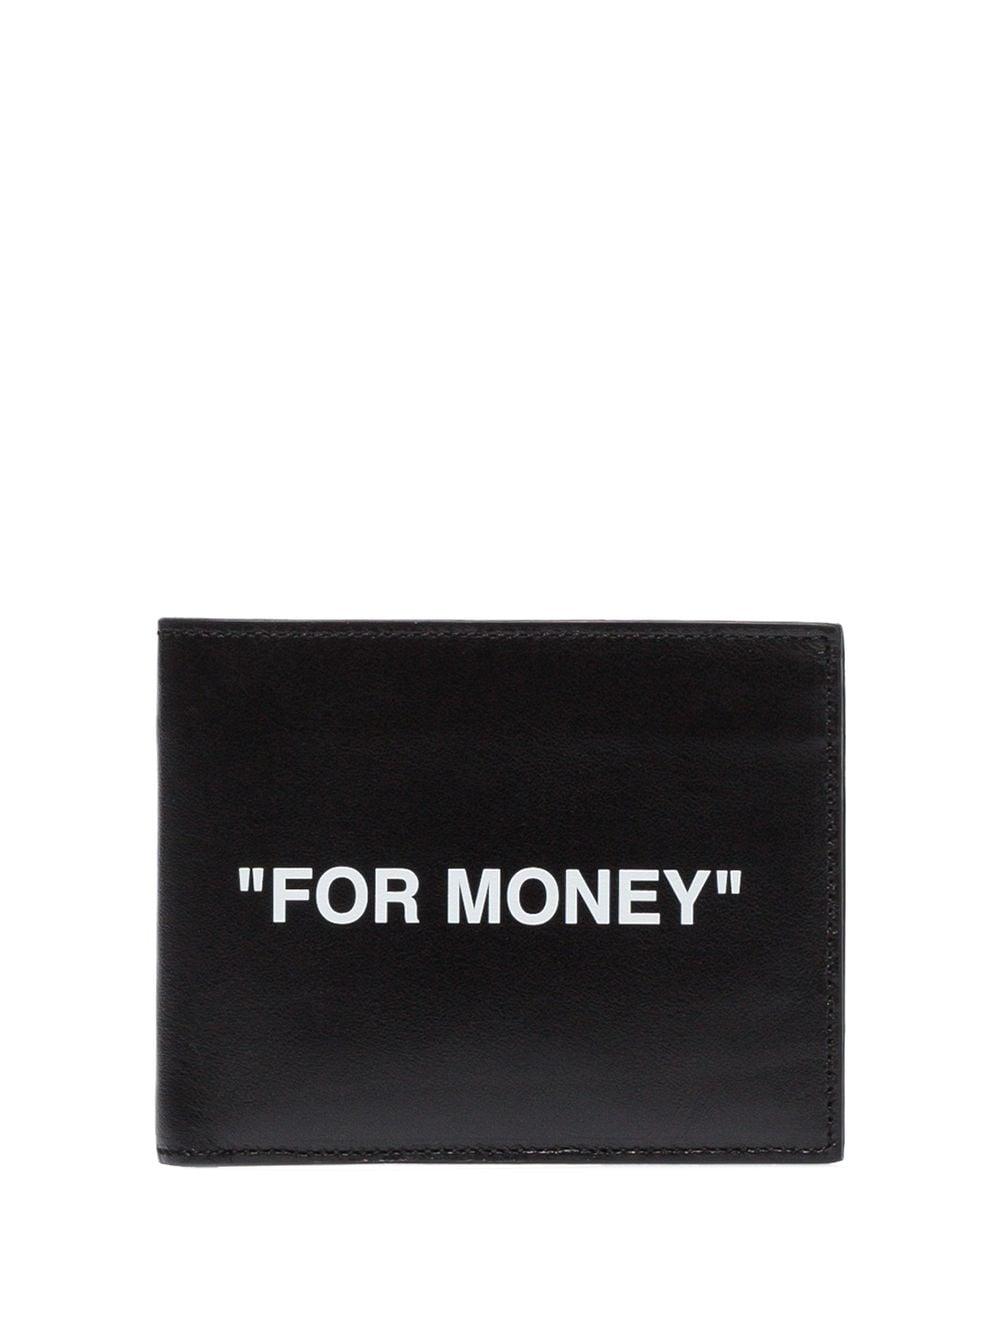 Off-White c/o Virgil Abloh Leather Quote Bifold Wallet in Black/White 